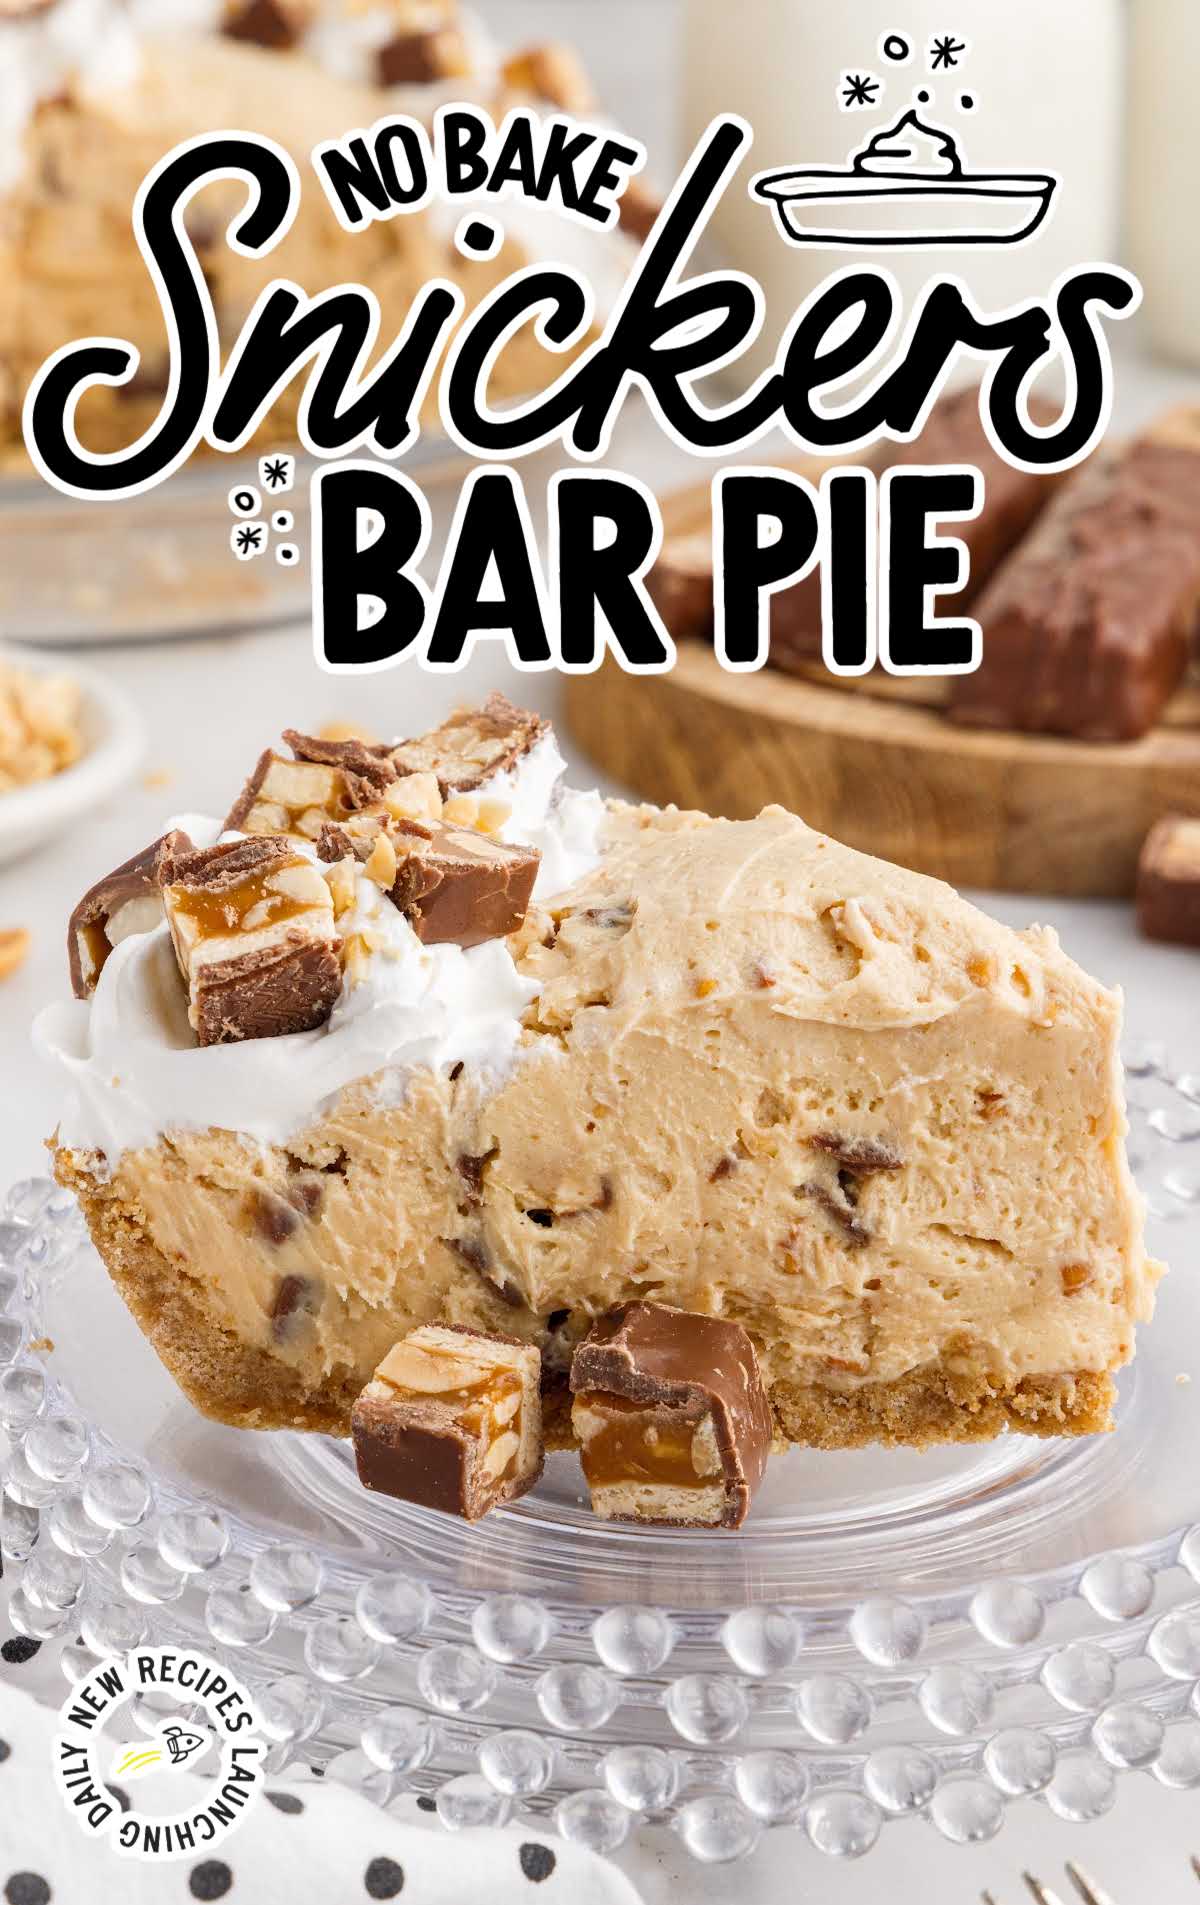 close up shot of a slice of pie topped with pieces of snickers on a plate